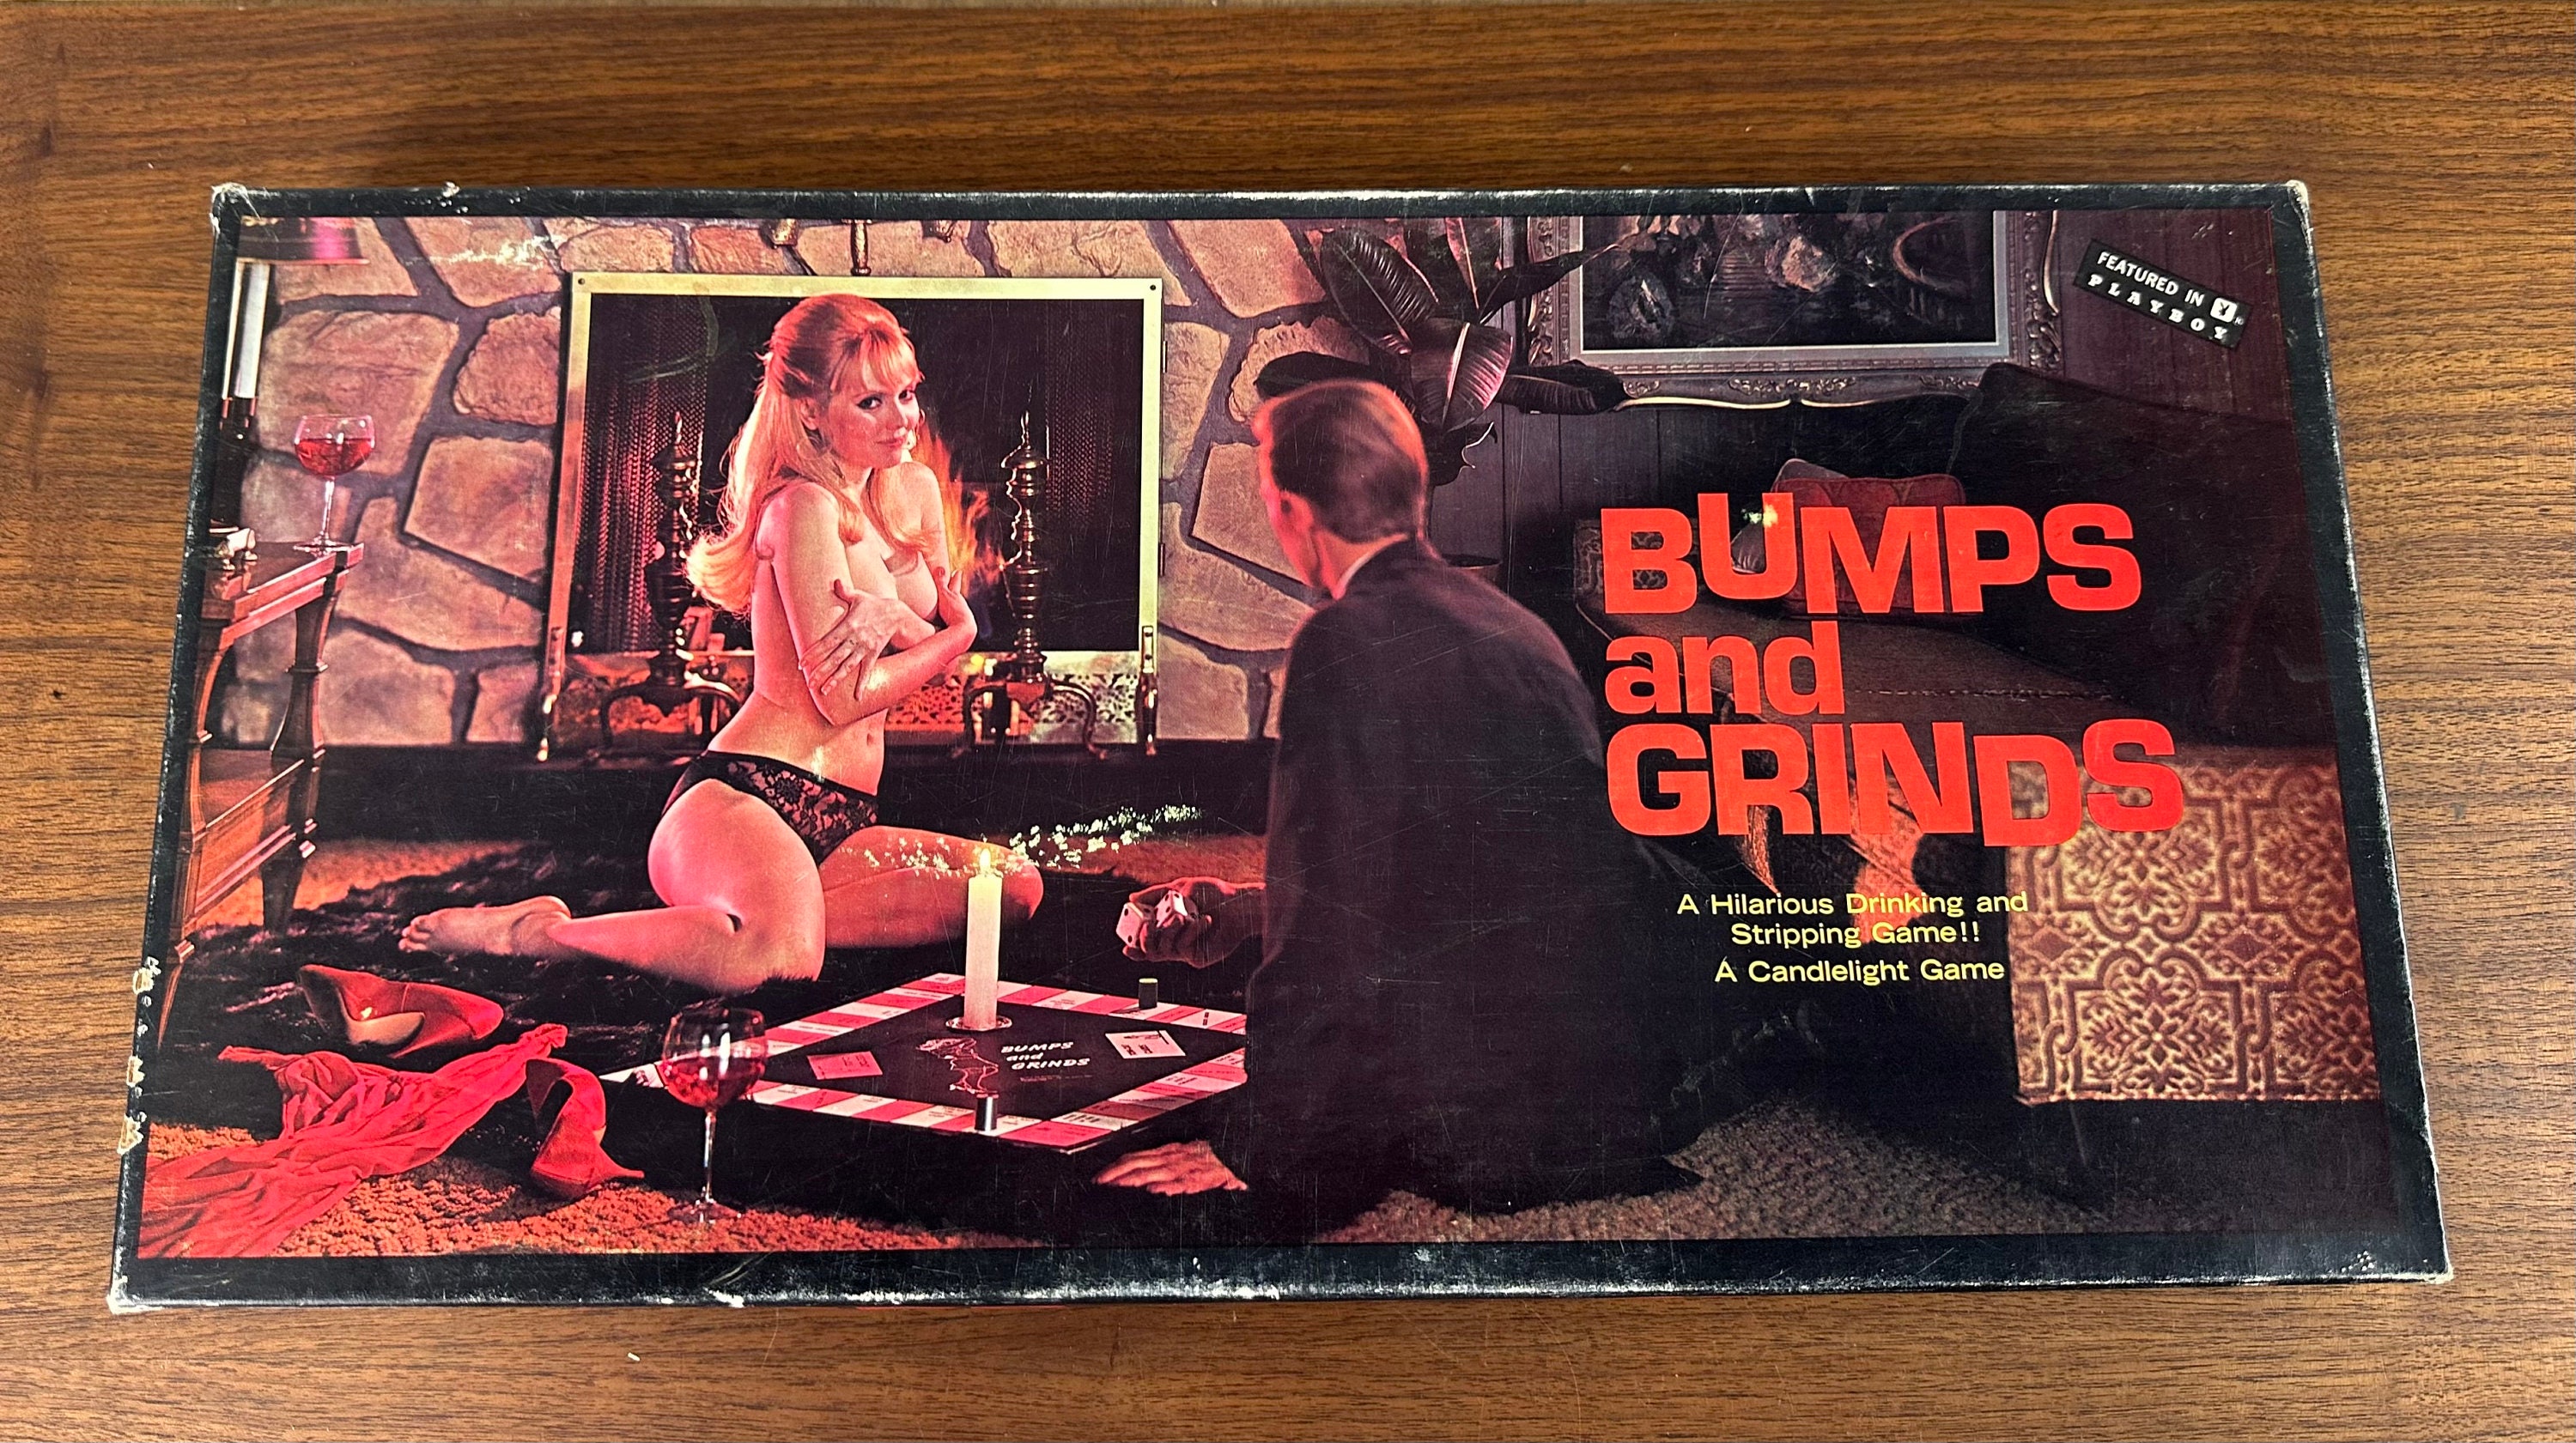 Vintage 1970 Adult-themed Bump and Grinds Board Game photo